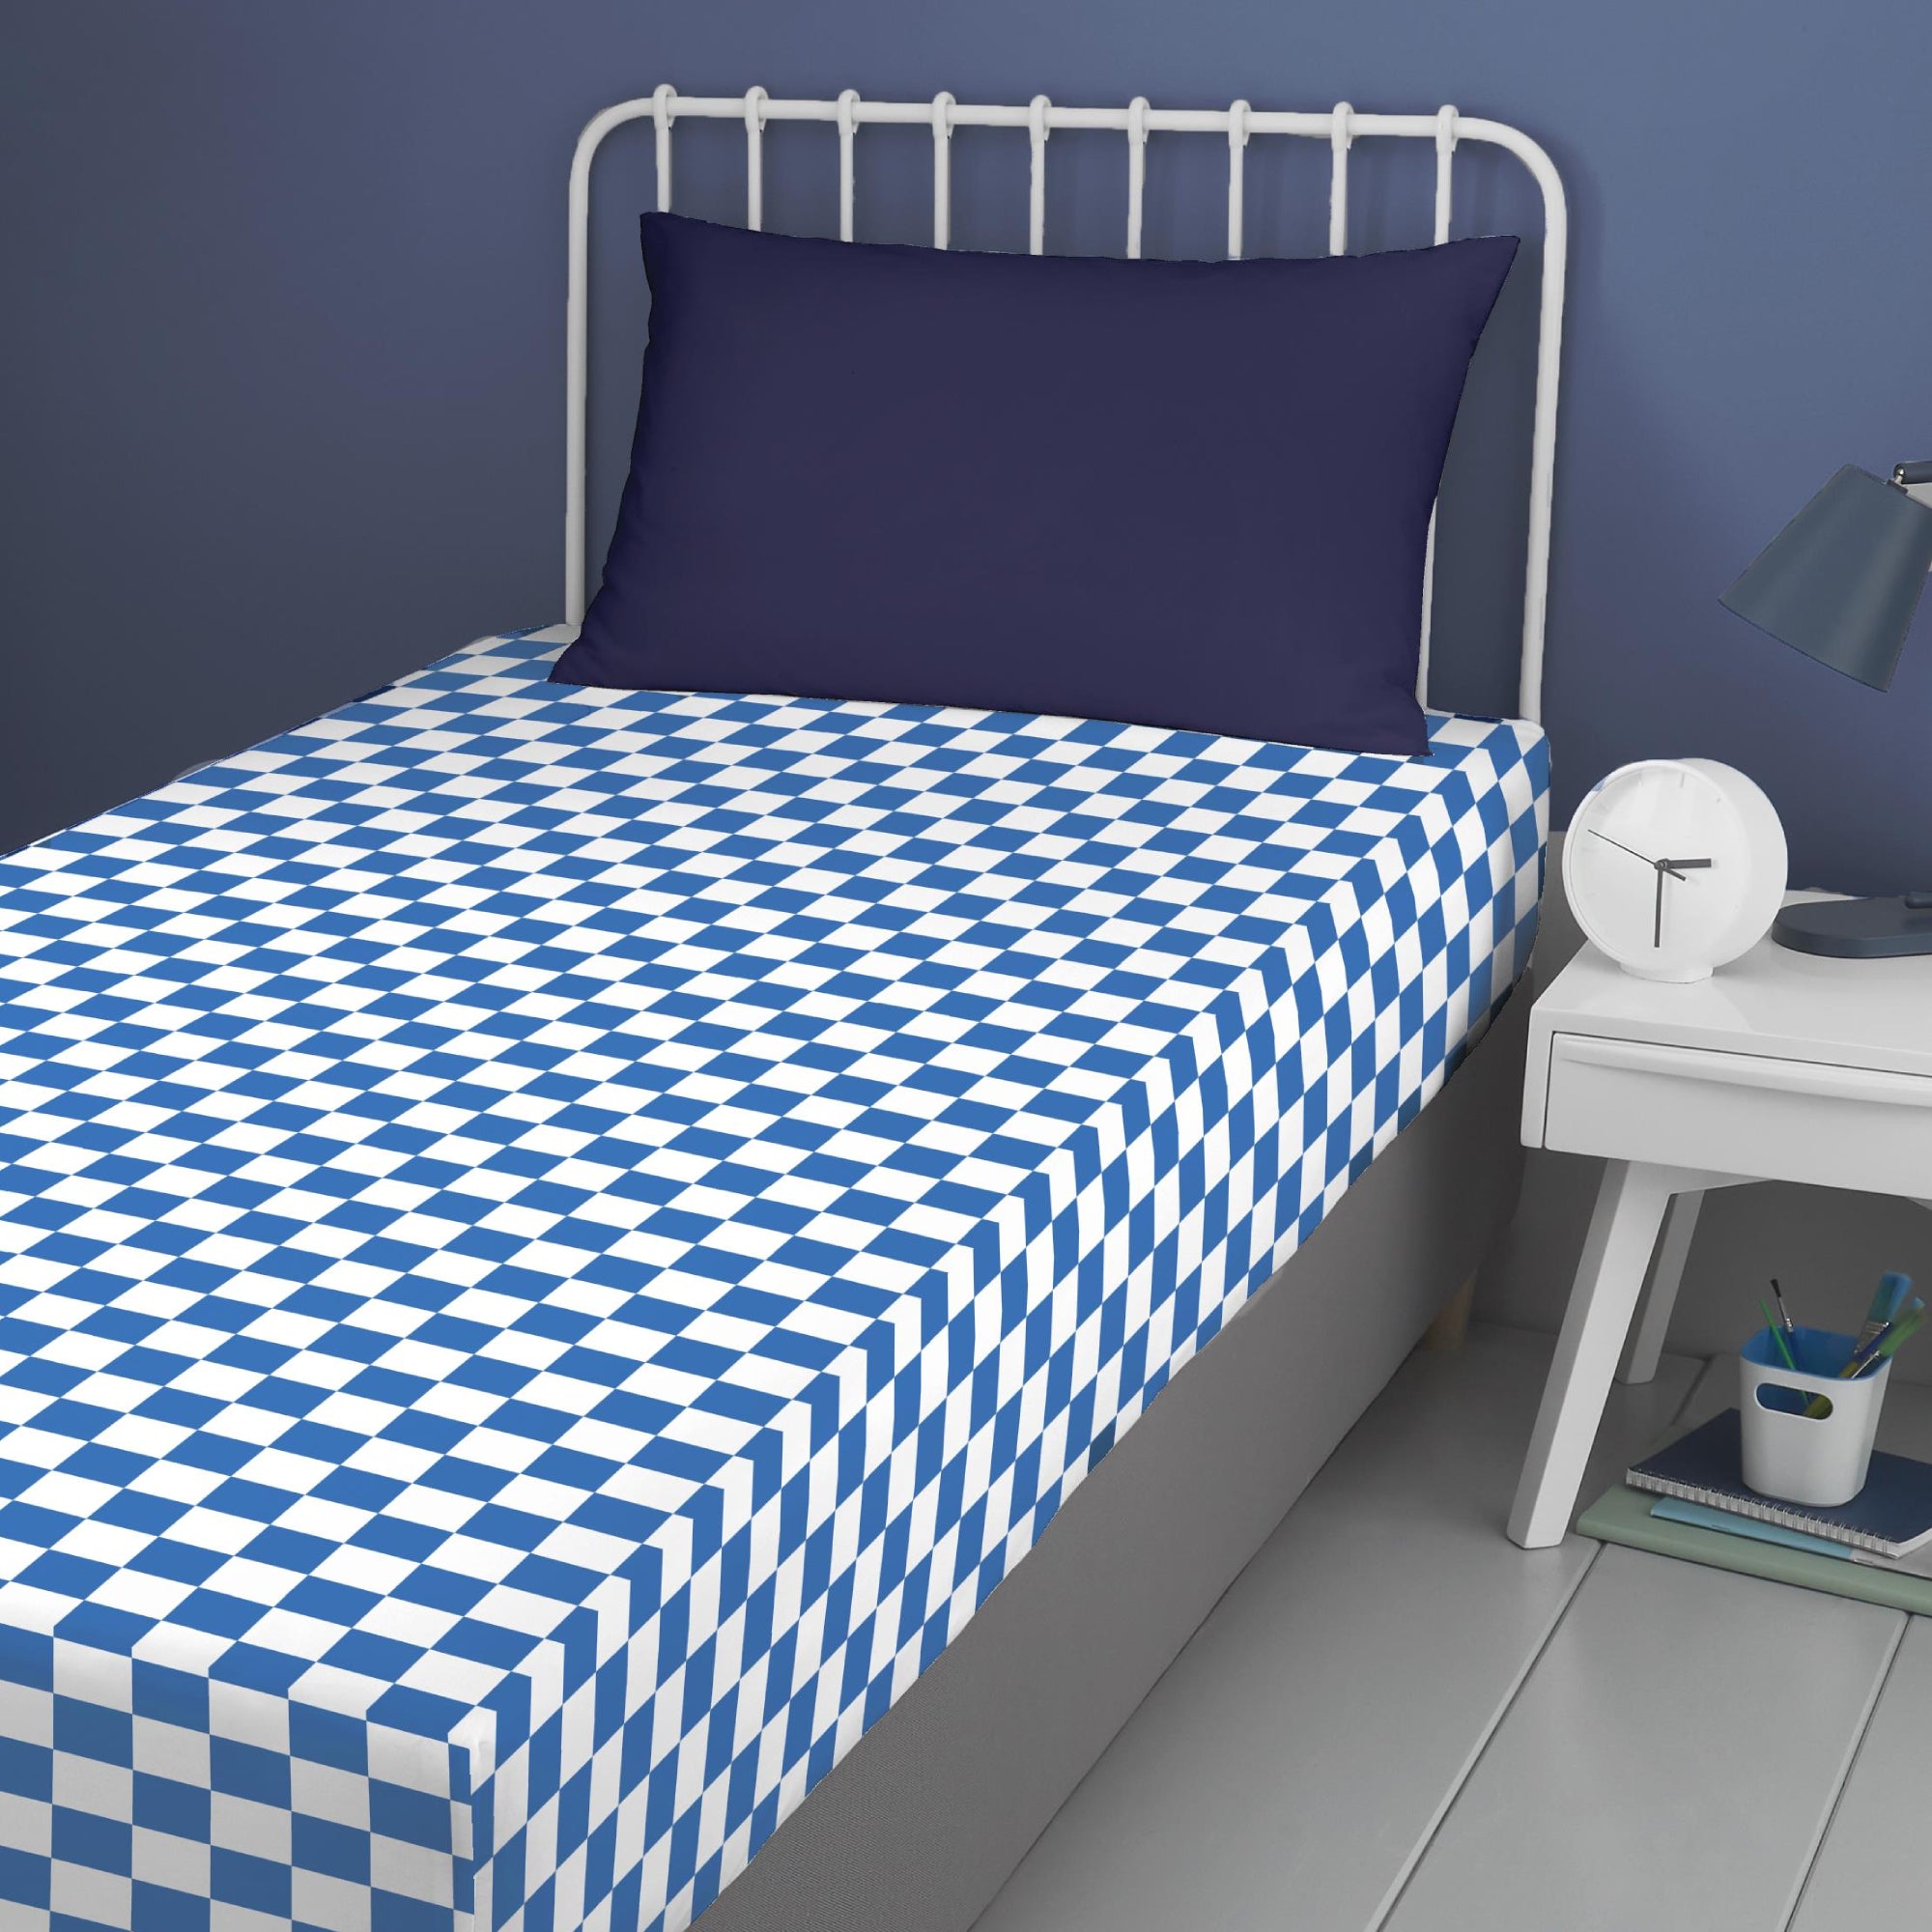 25cm Fitted Bed Sheet On The Move by Bedlam in Blue